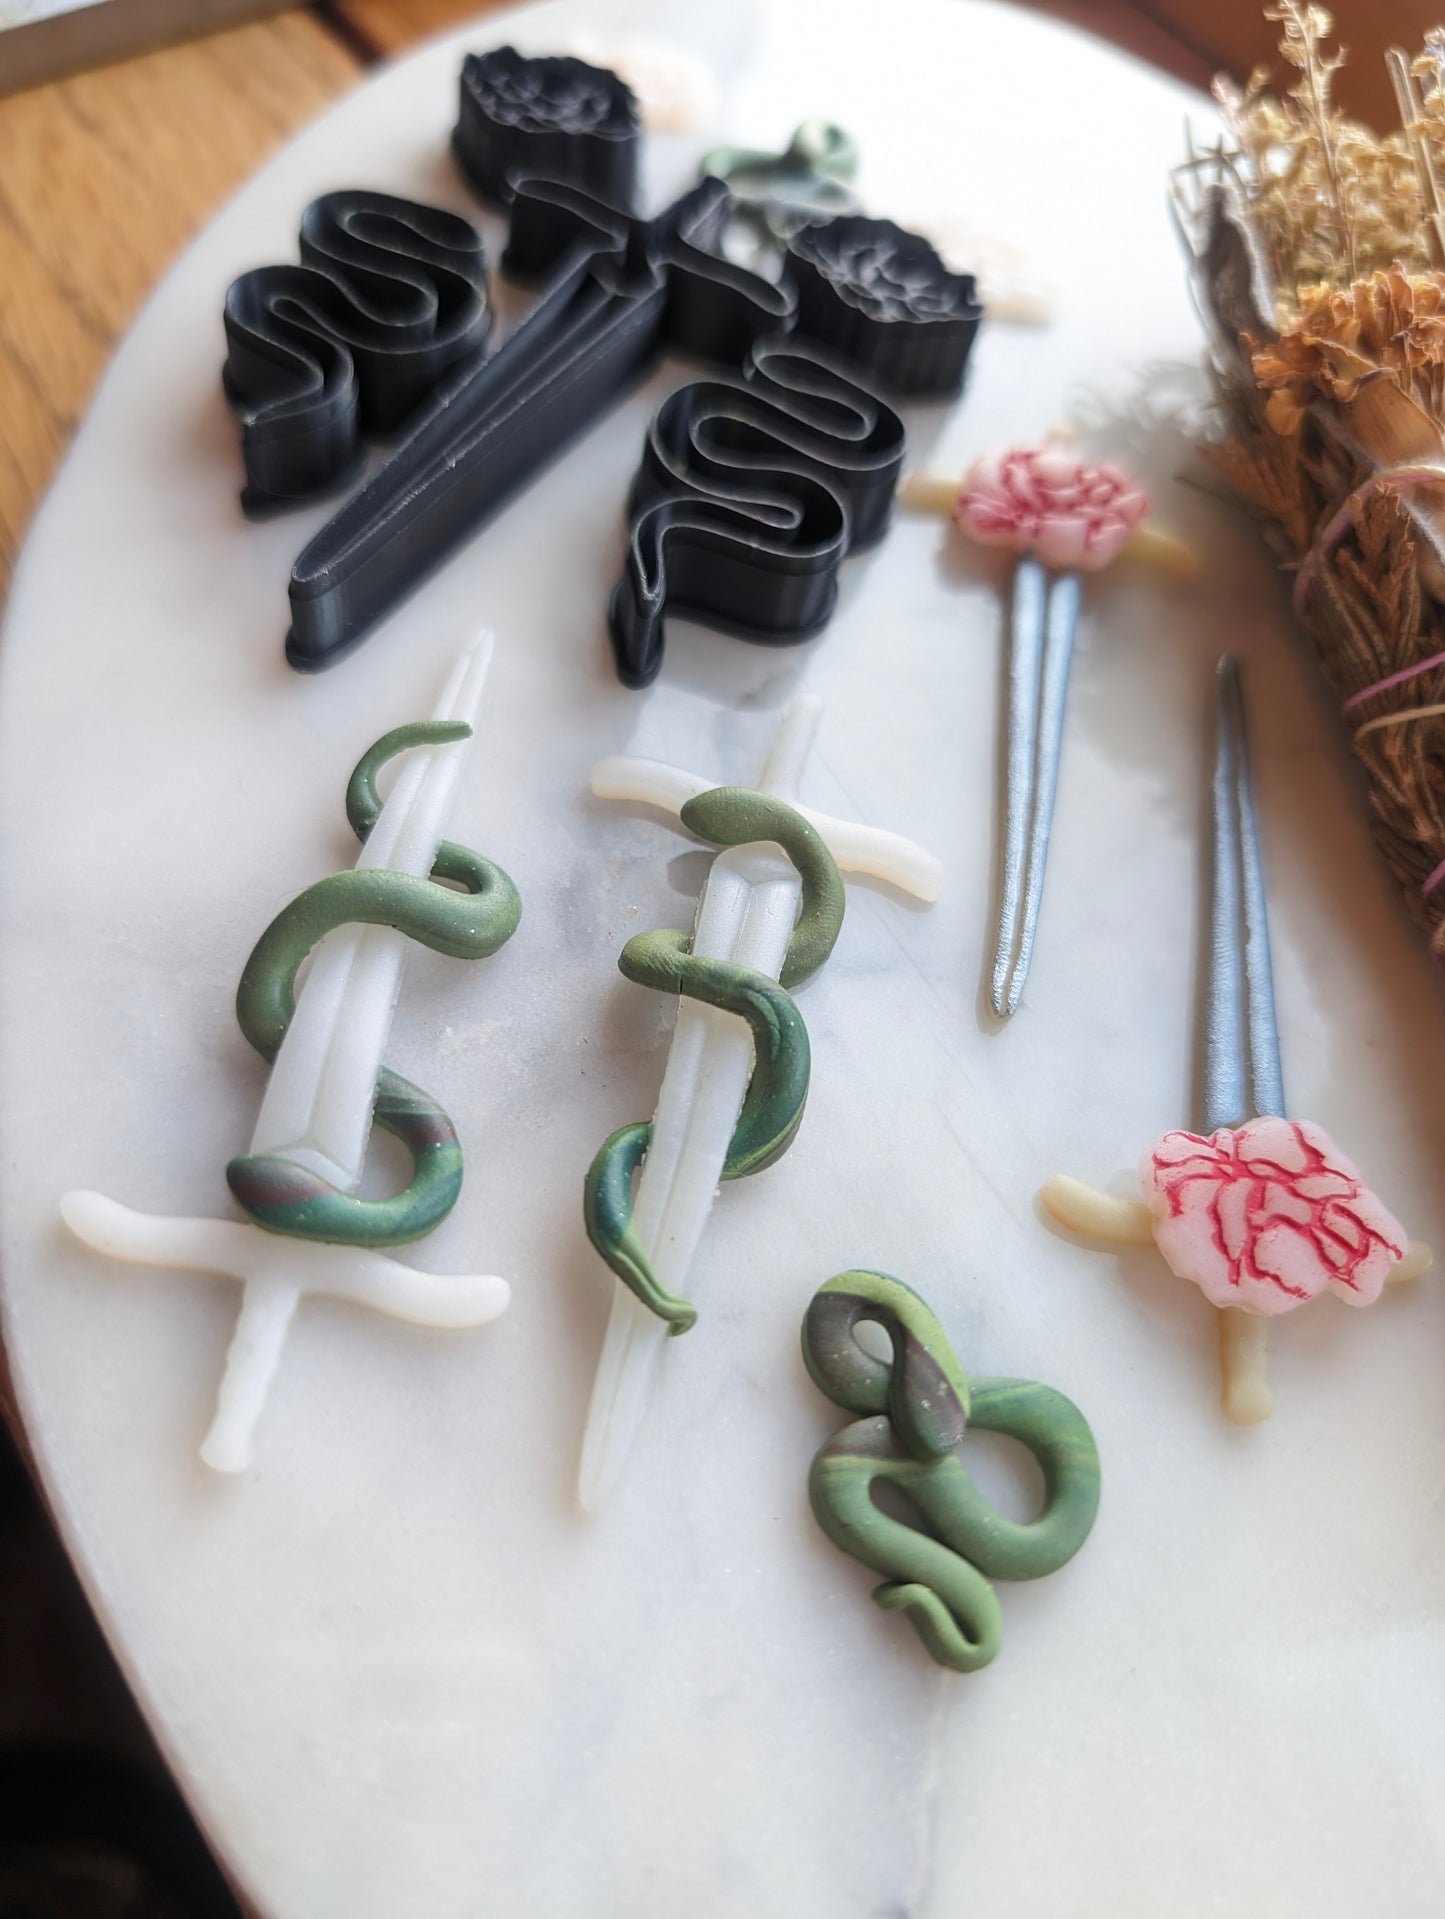 Set of 5 Sword with Snakes and Flowers Sharp Clay Cutter